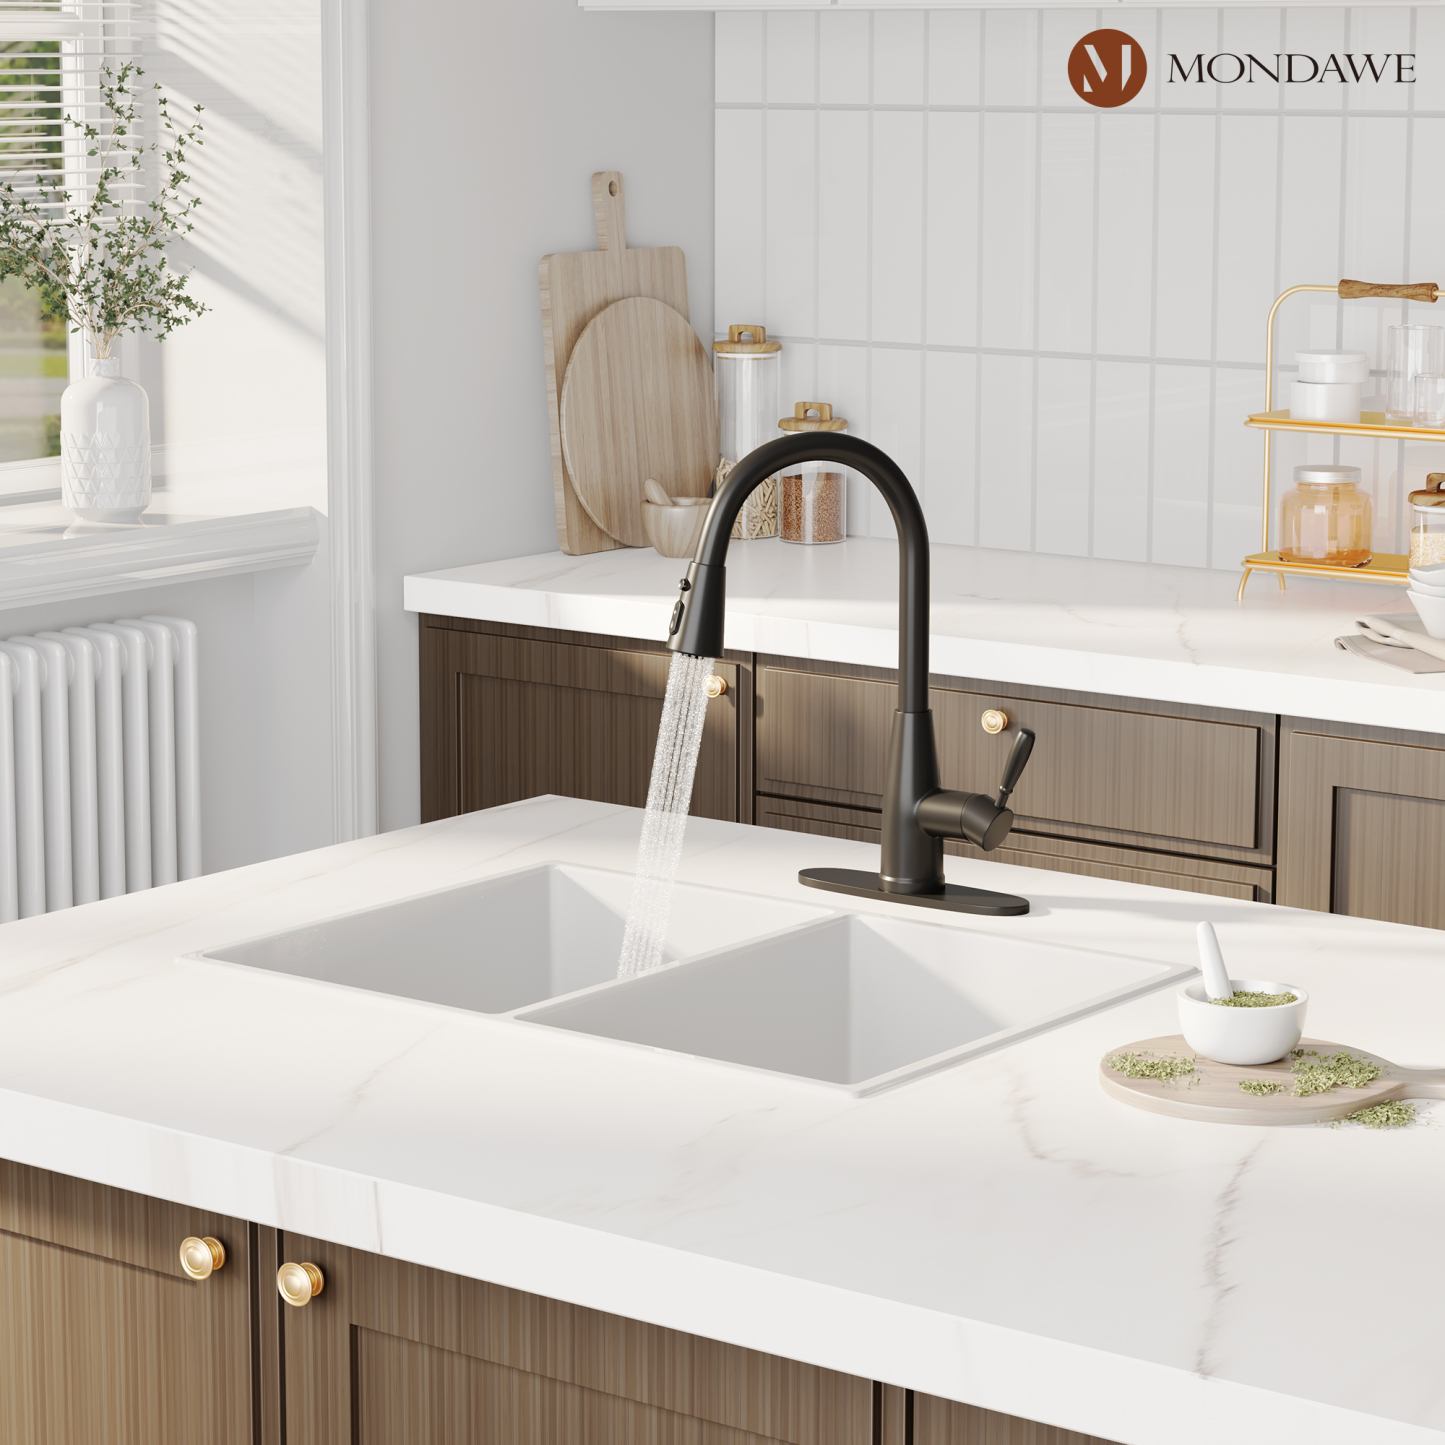 Mondawe?Single?Handle?1.8?gpm?Lead-Free?Copper?Brass?Pull?Down?Kitchen?Faucet?for?Bar?Laundry?Kitchen?Sink-Mondawe